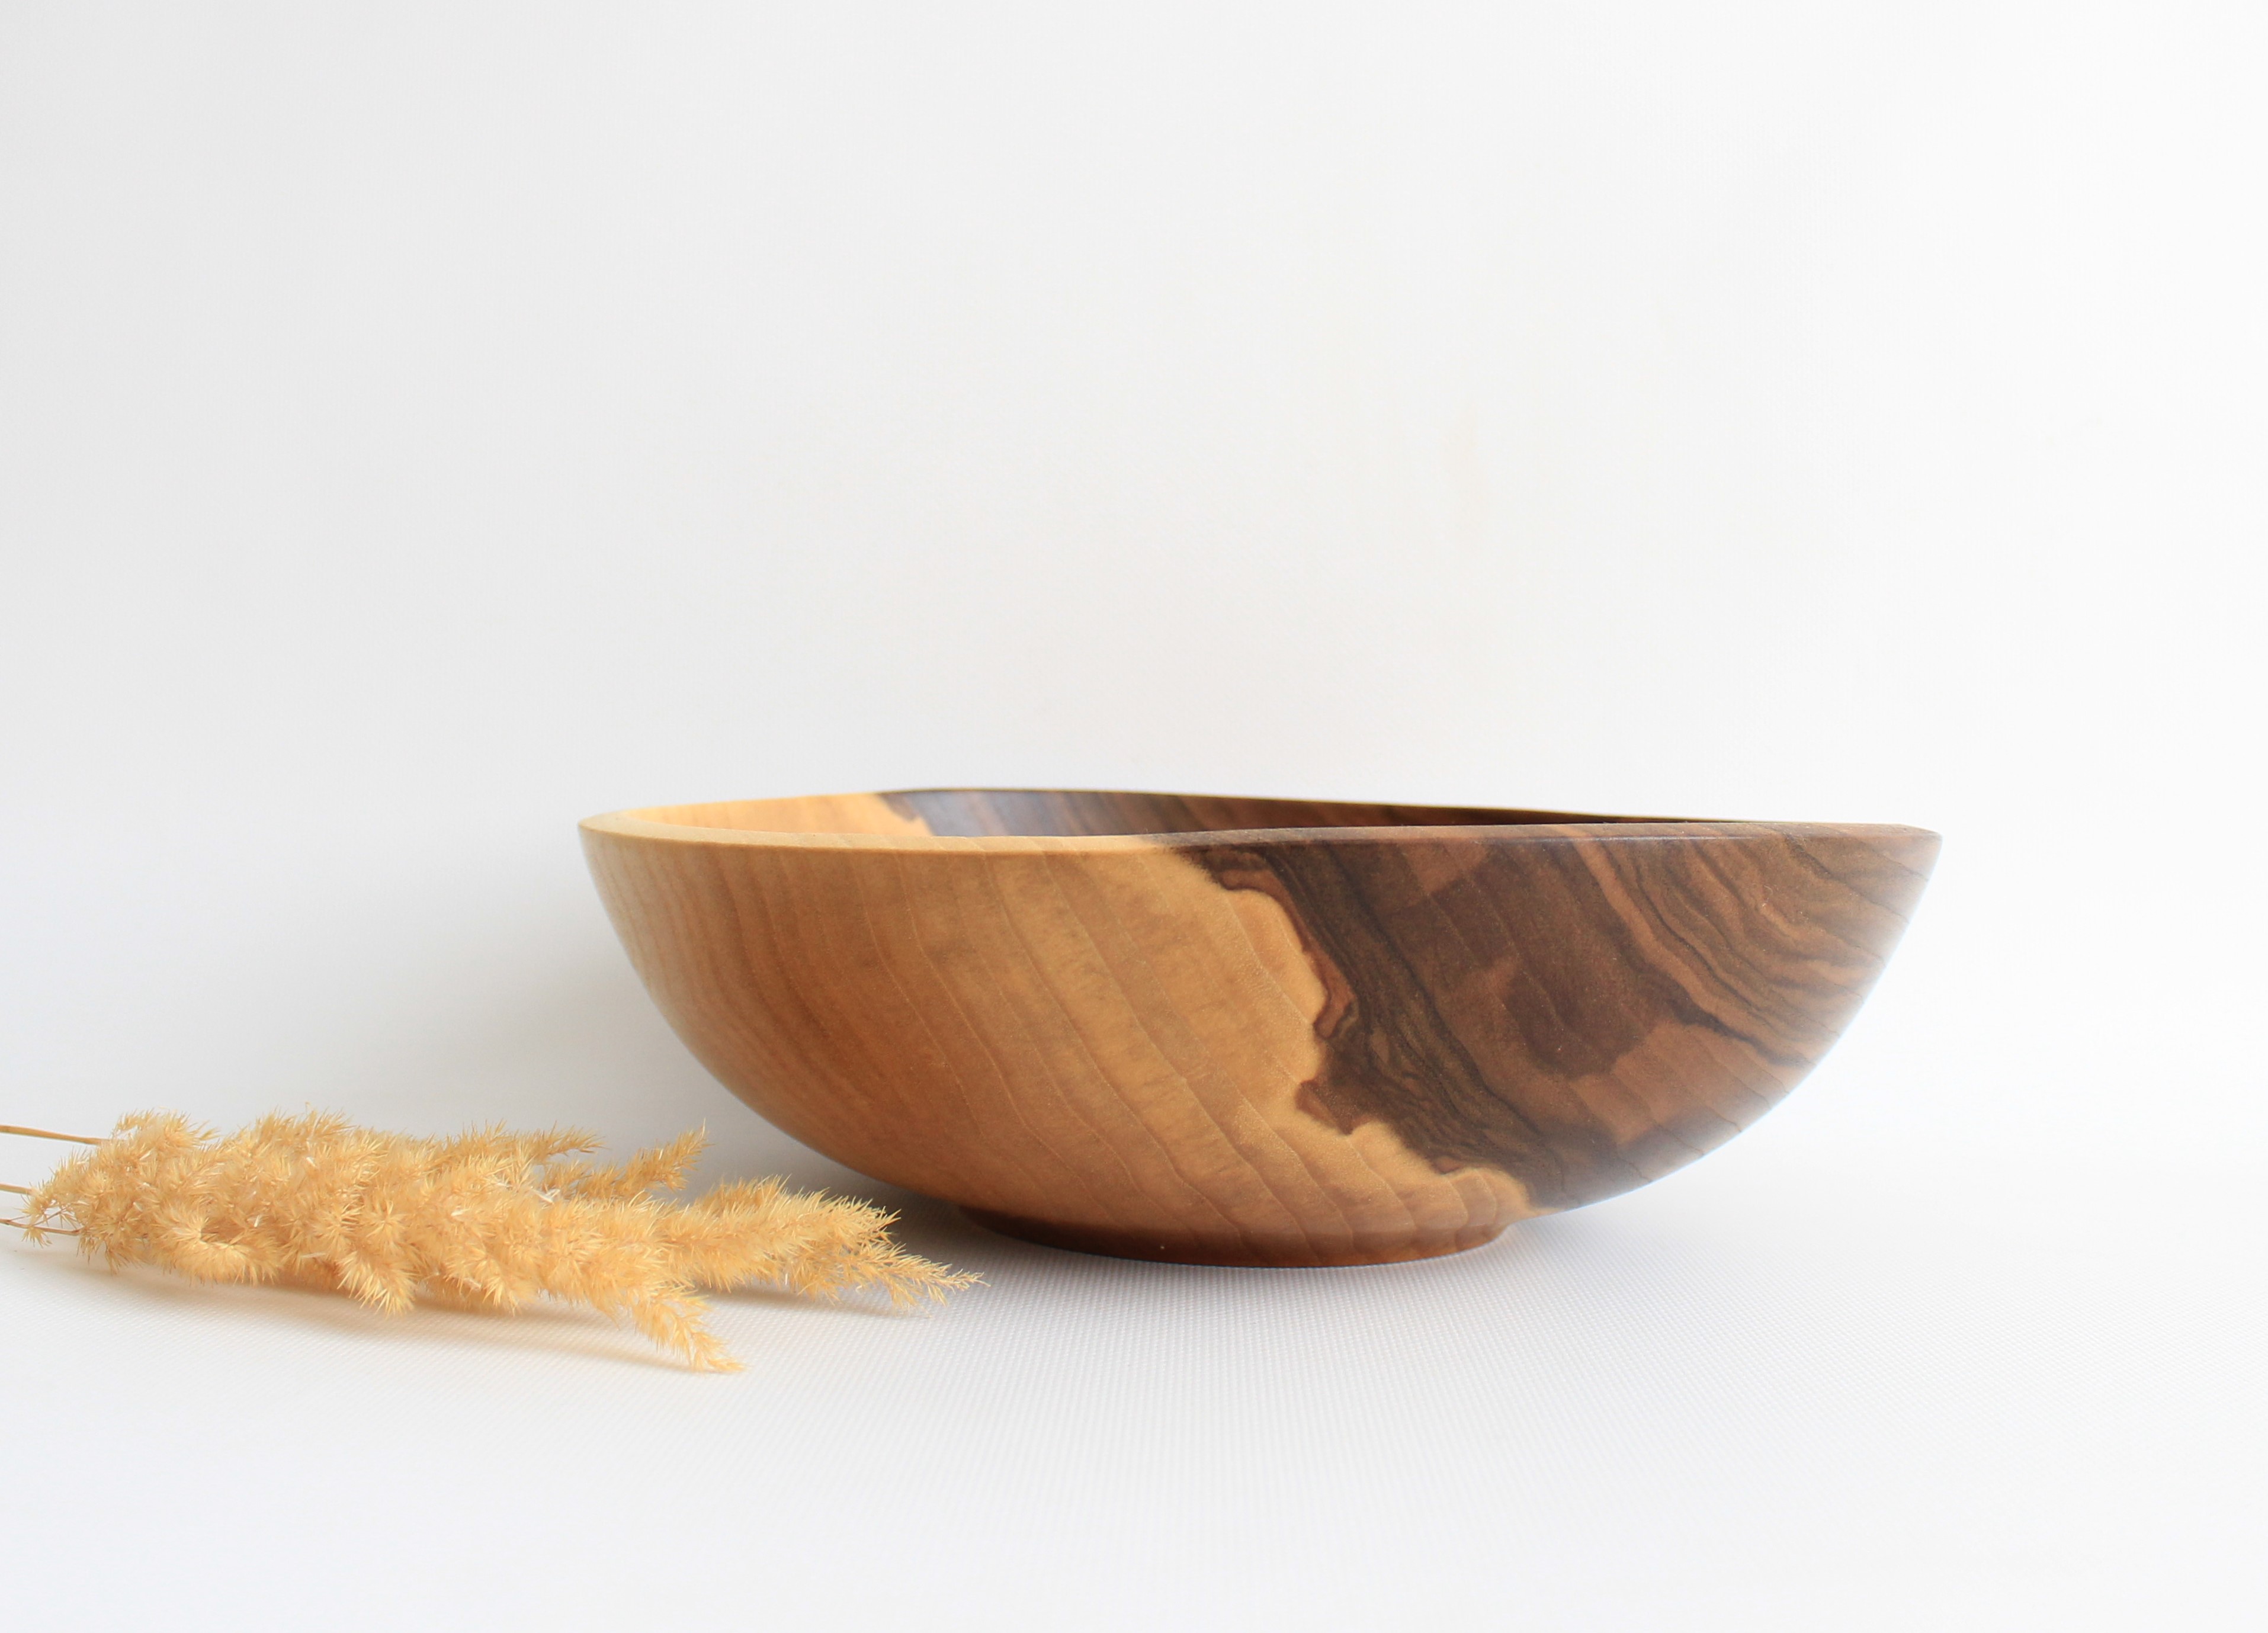 Wood turned bowl for salad. wooden centerpiece bowl handmade